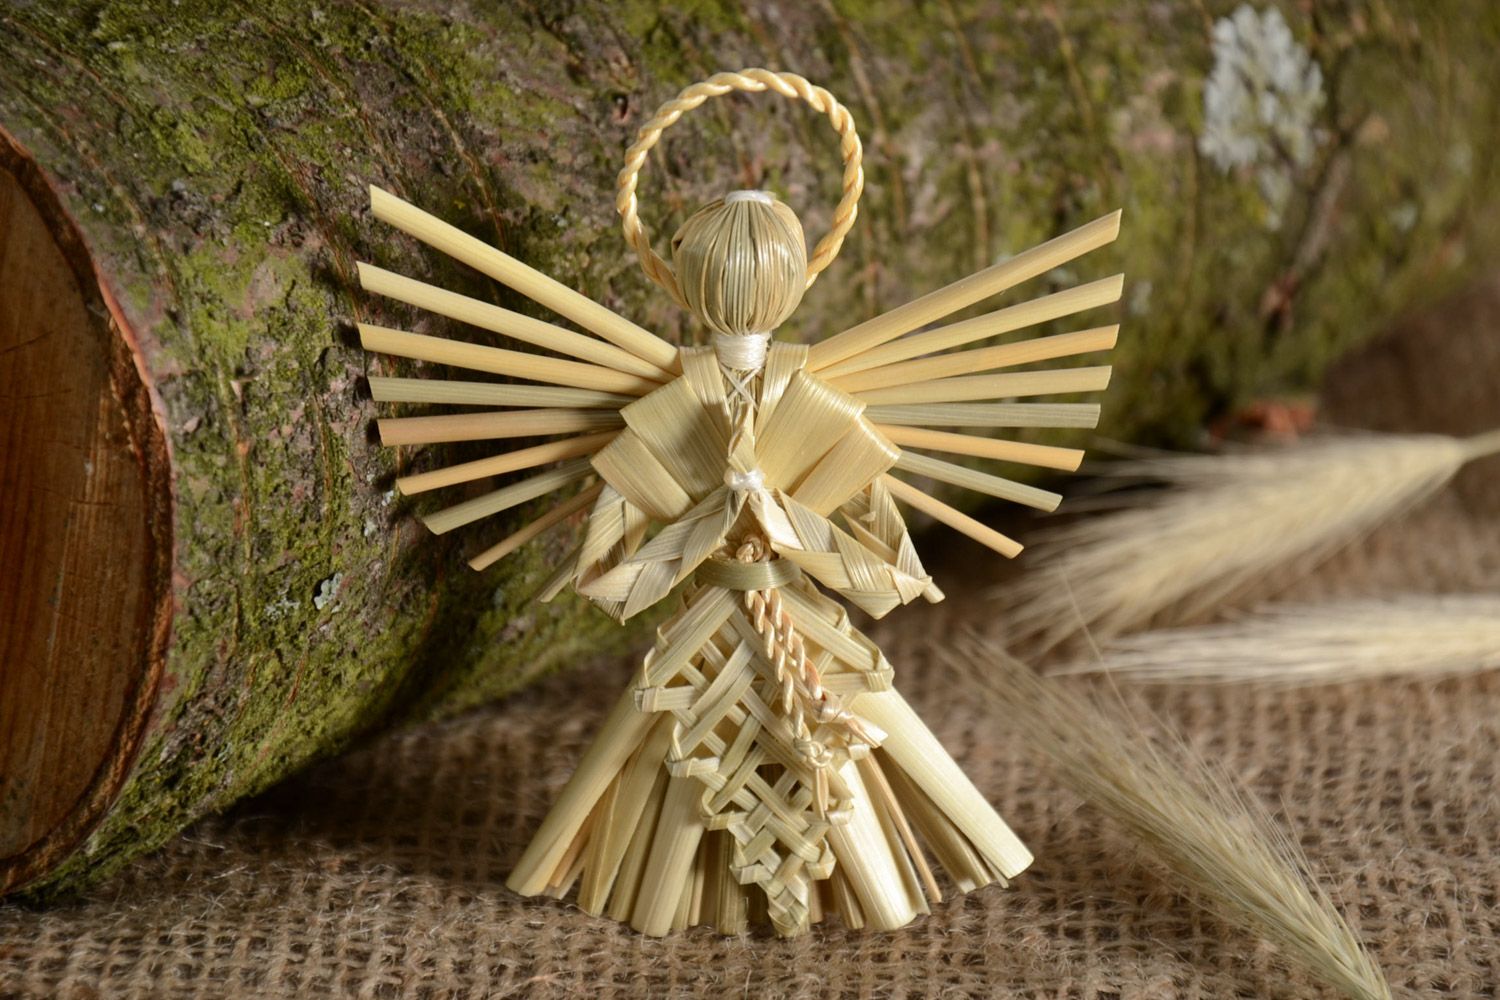 Guardian angel woven of natural straw handmade wall hanging decoration photo 1